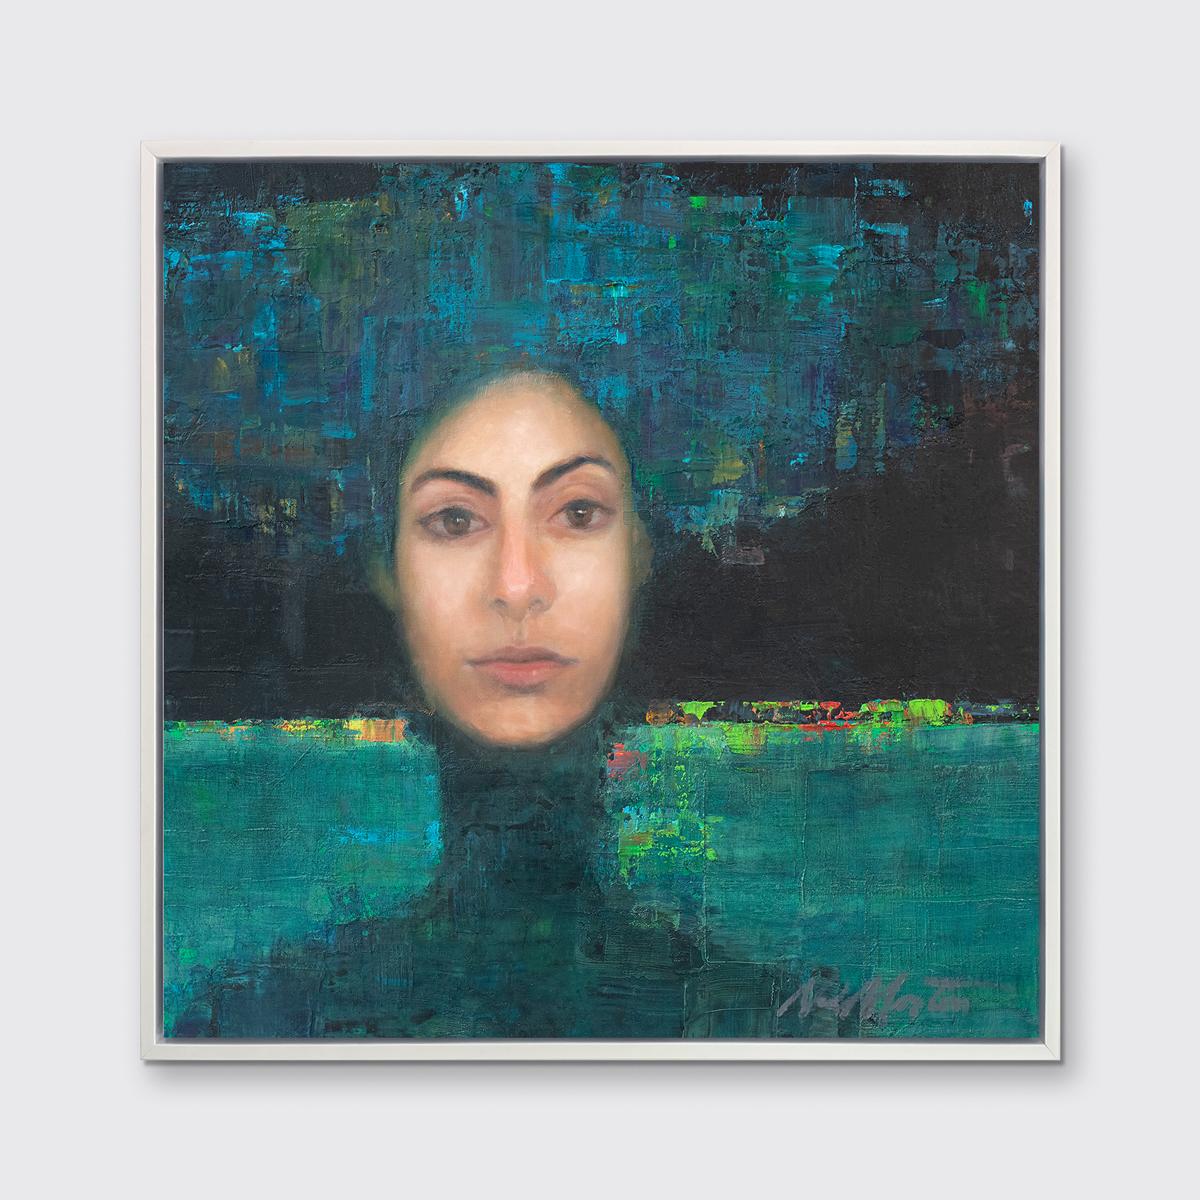 This abstract portrait Limited Edition print by Ned Martin blends realistic and abstracted styles. Part of his Spirits Through Time series of female portraits, the woman's face is rendered realistically, while her neck and shoulders, and blue hair